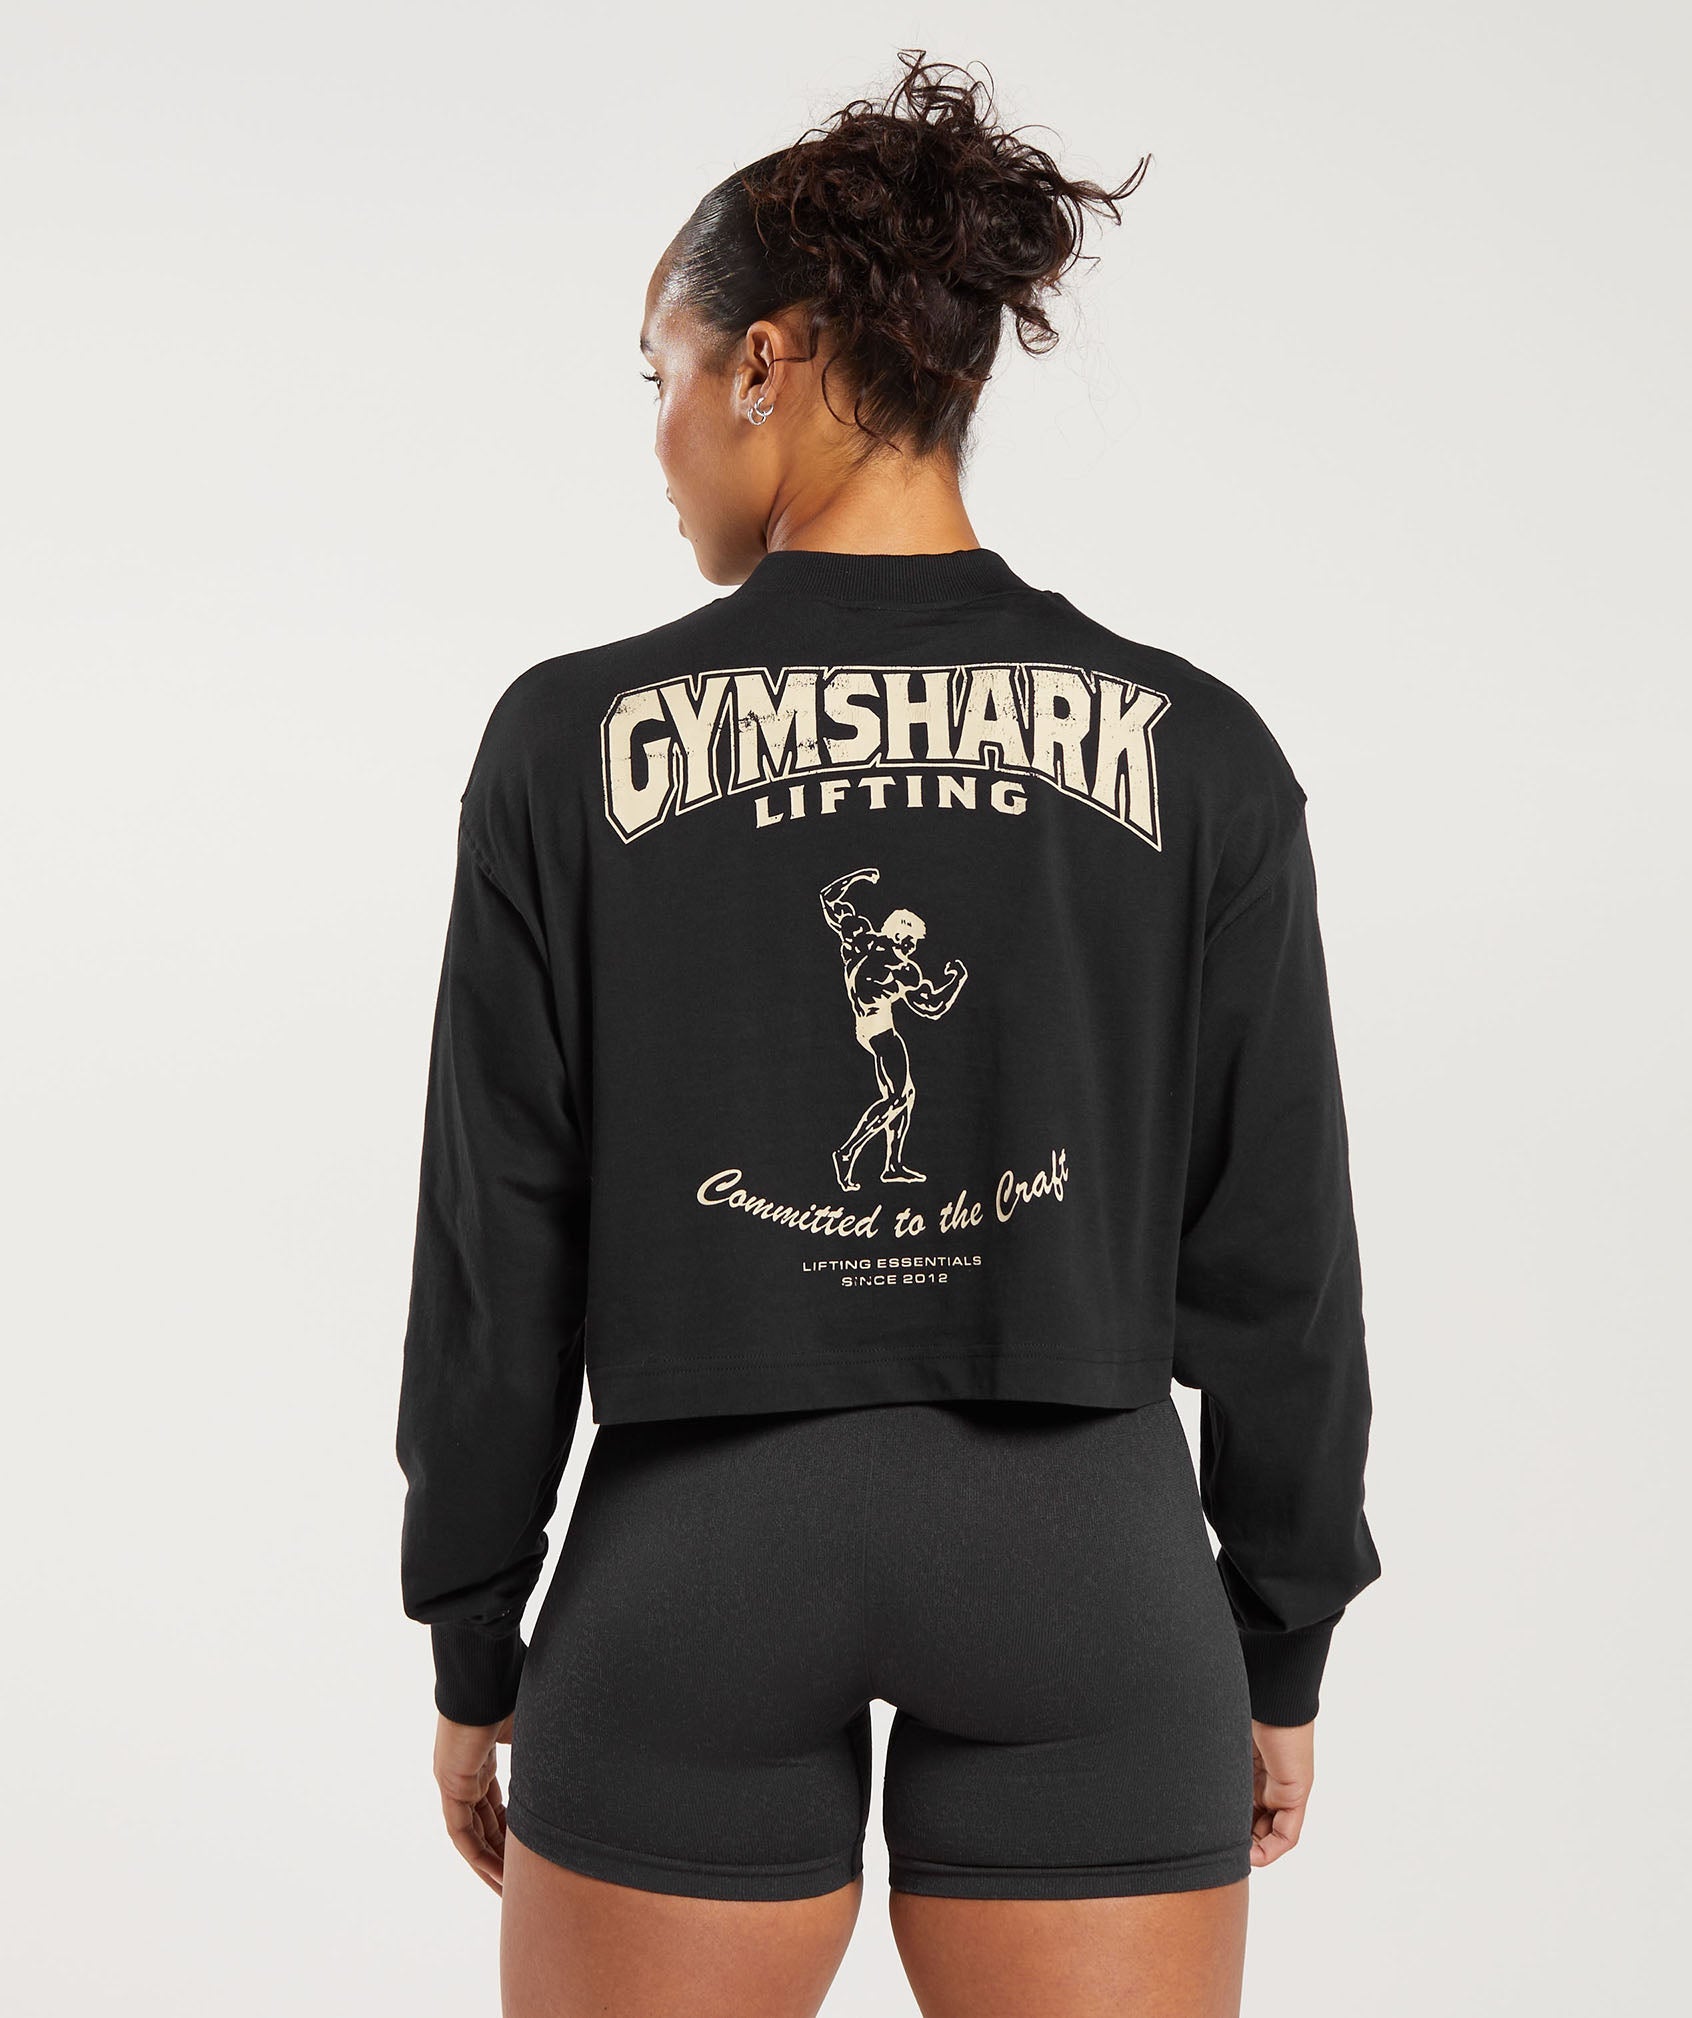 Committed To The Craft Long Sleeve Top in Black - view 1